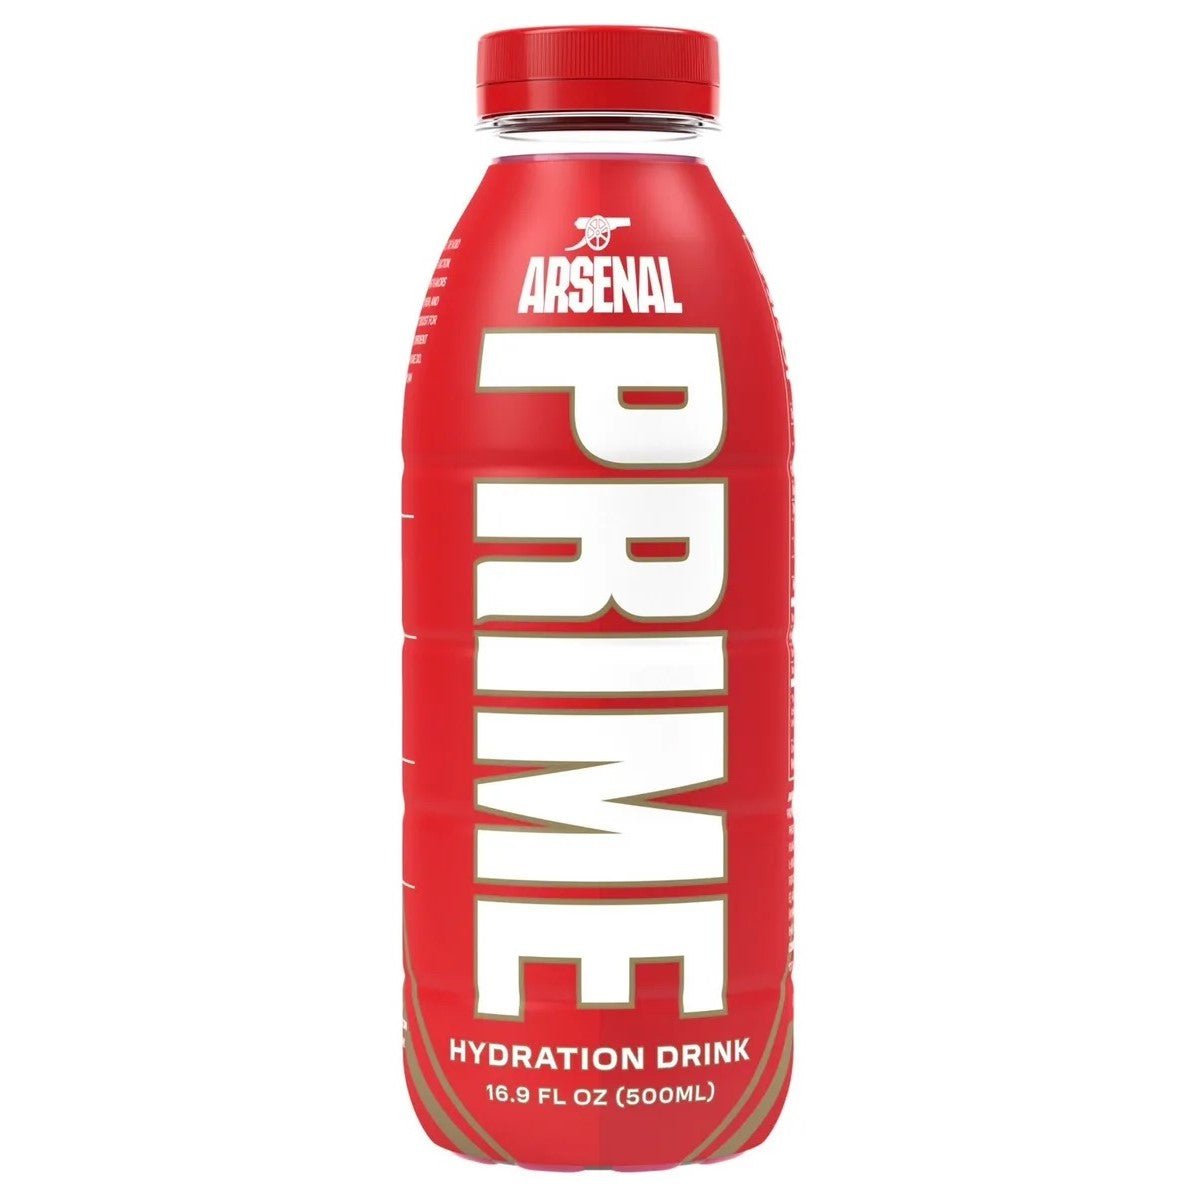 Prime Hydration By Logan Paul x KSI- Arsenal (Pre-Order) 500ml - Candy Mail UK